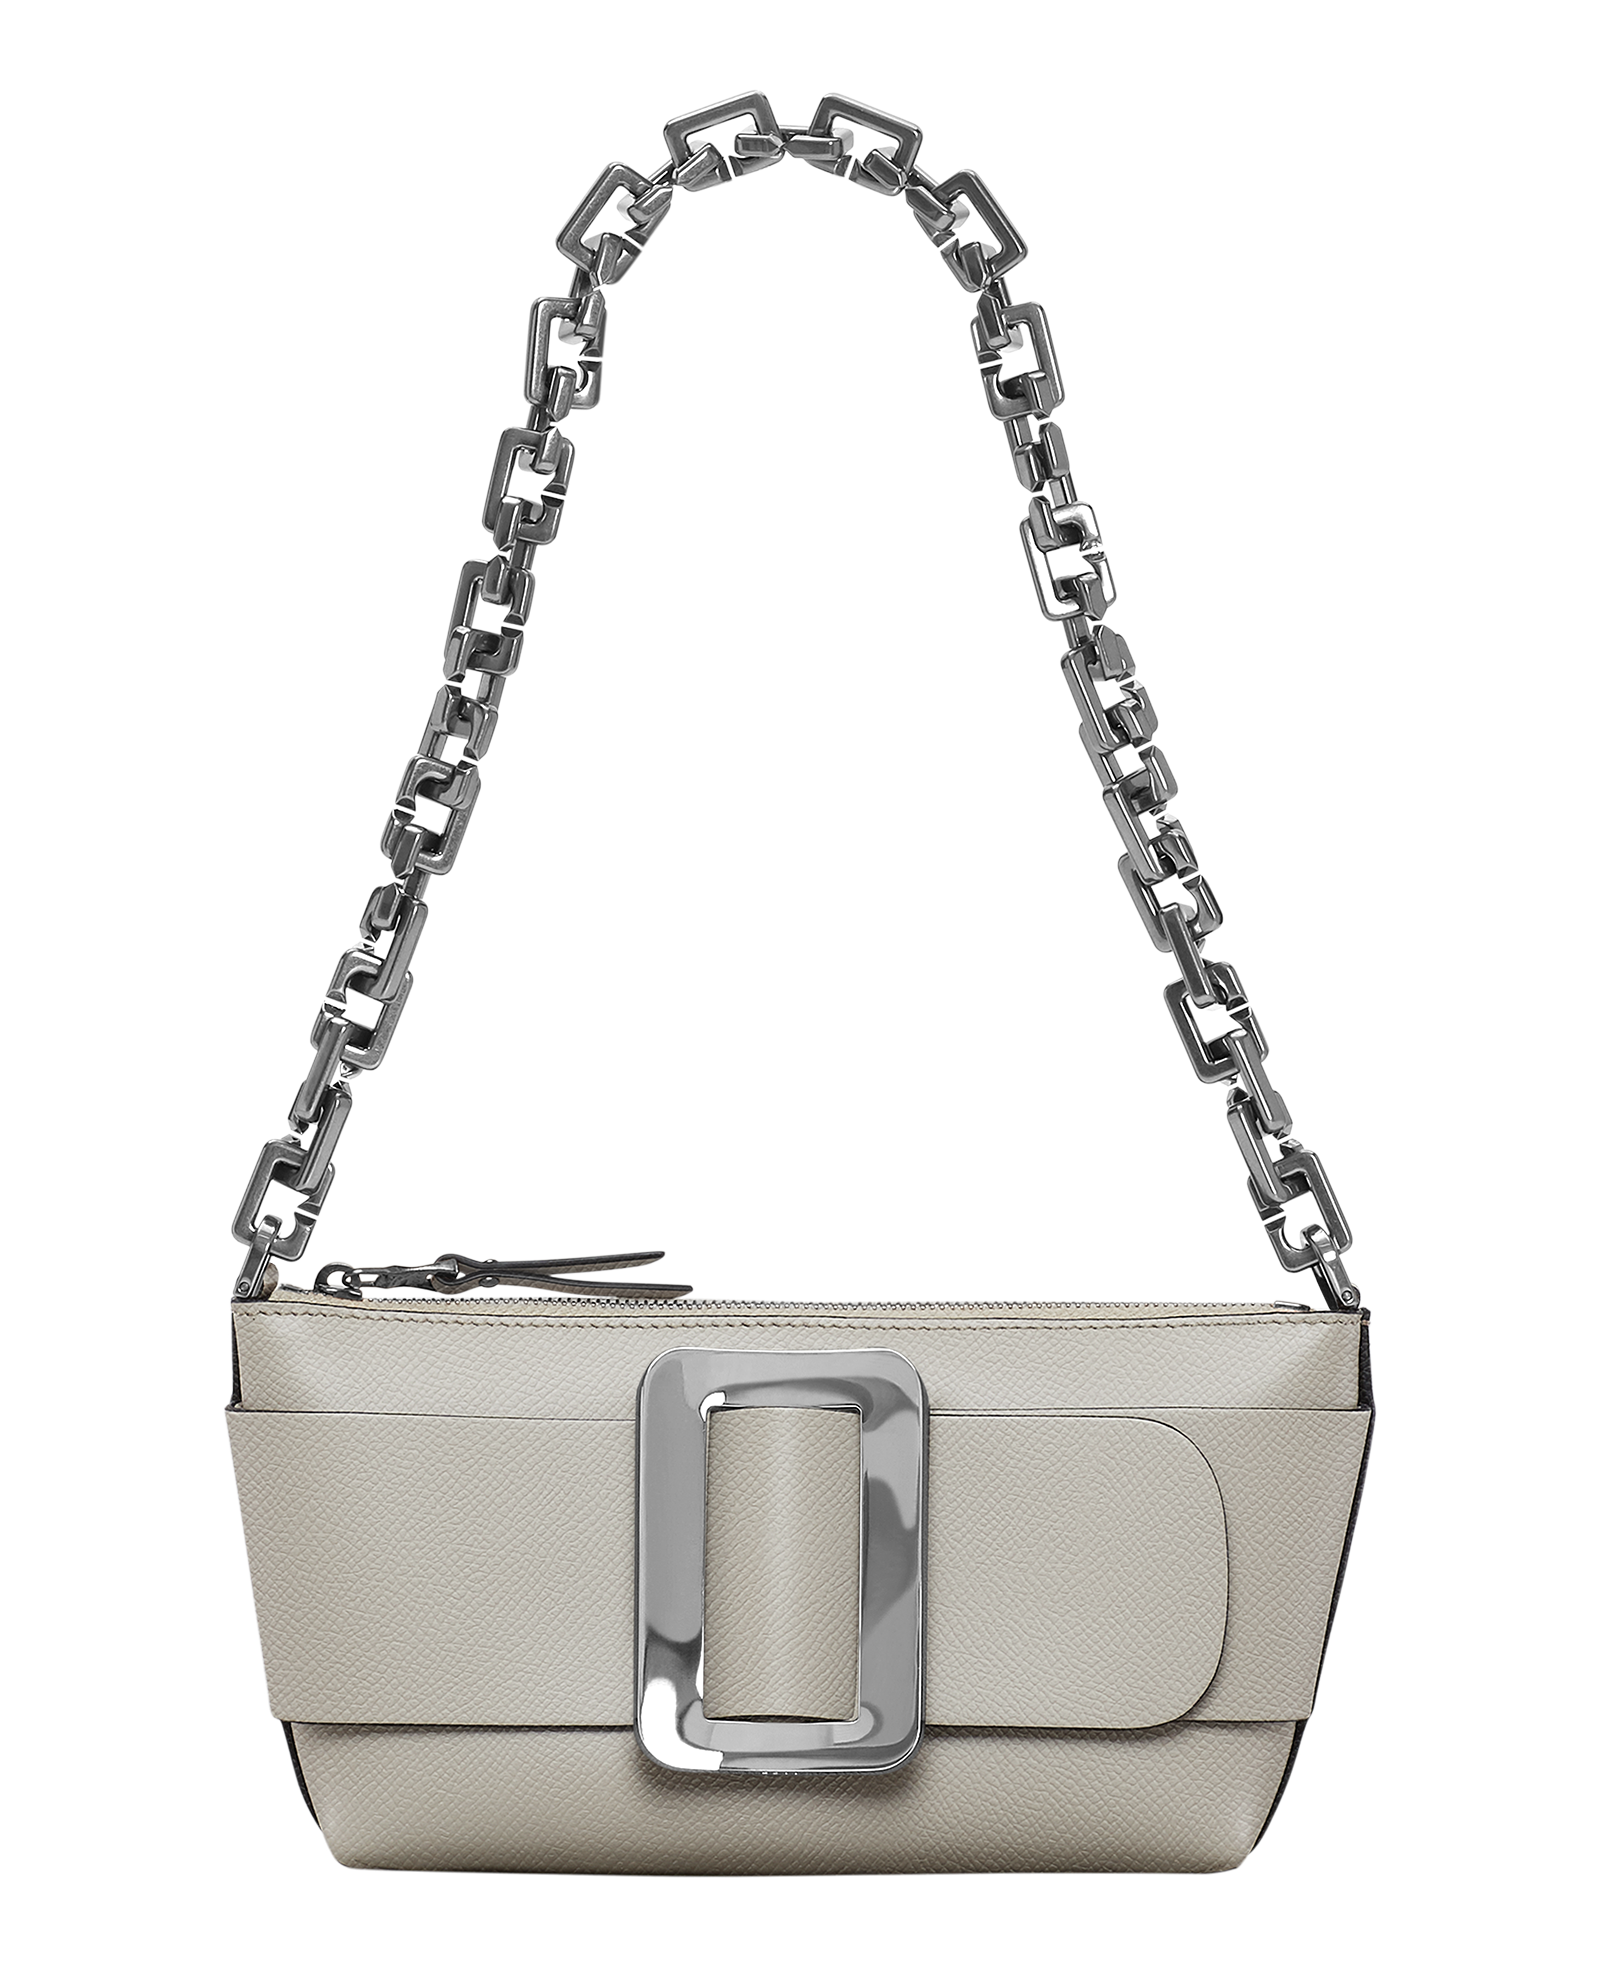 Buckle Pouchette Bag in Grey Leather